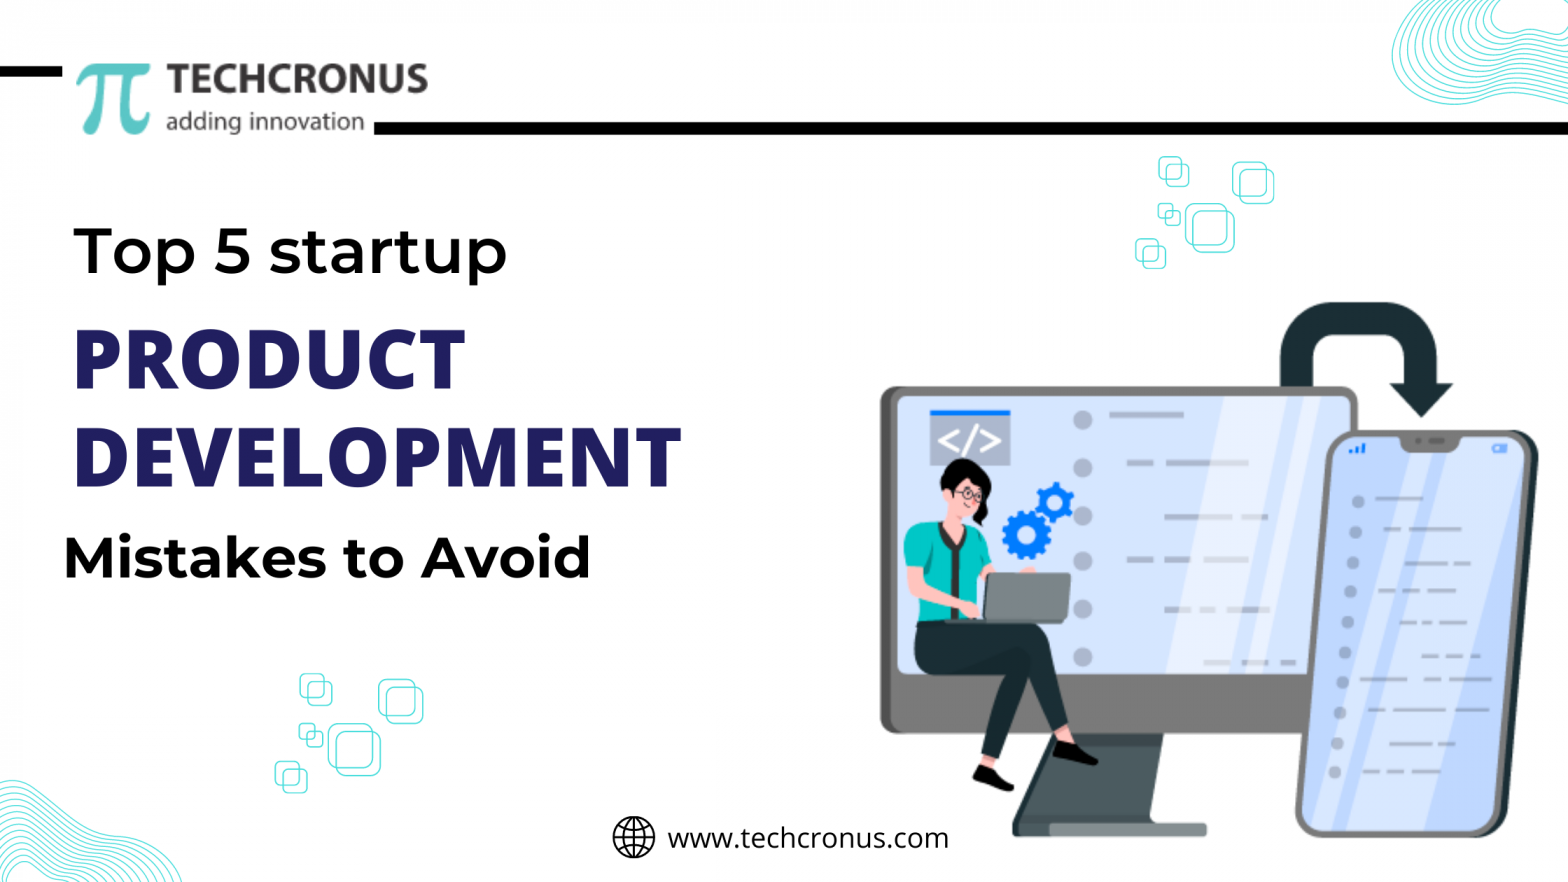 Top 5 Startup Product Development Mistakes to Avoid